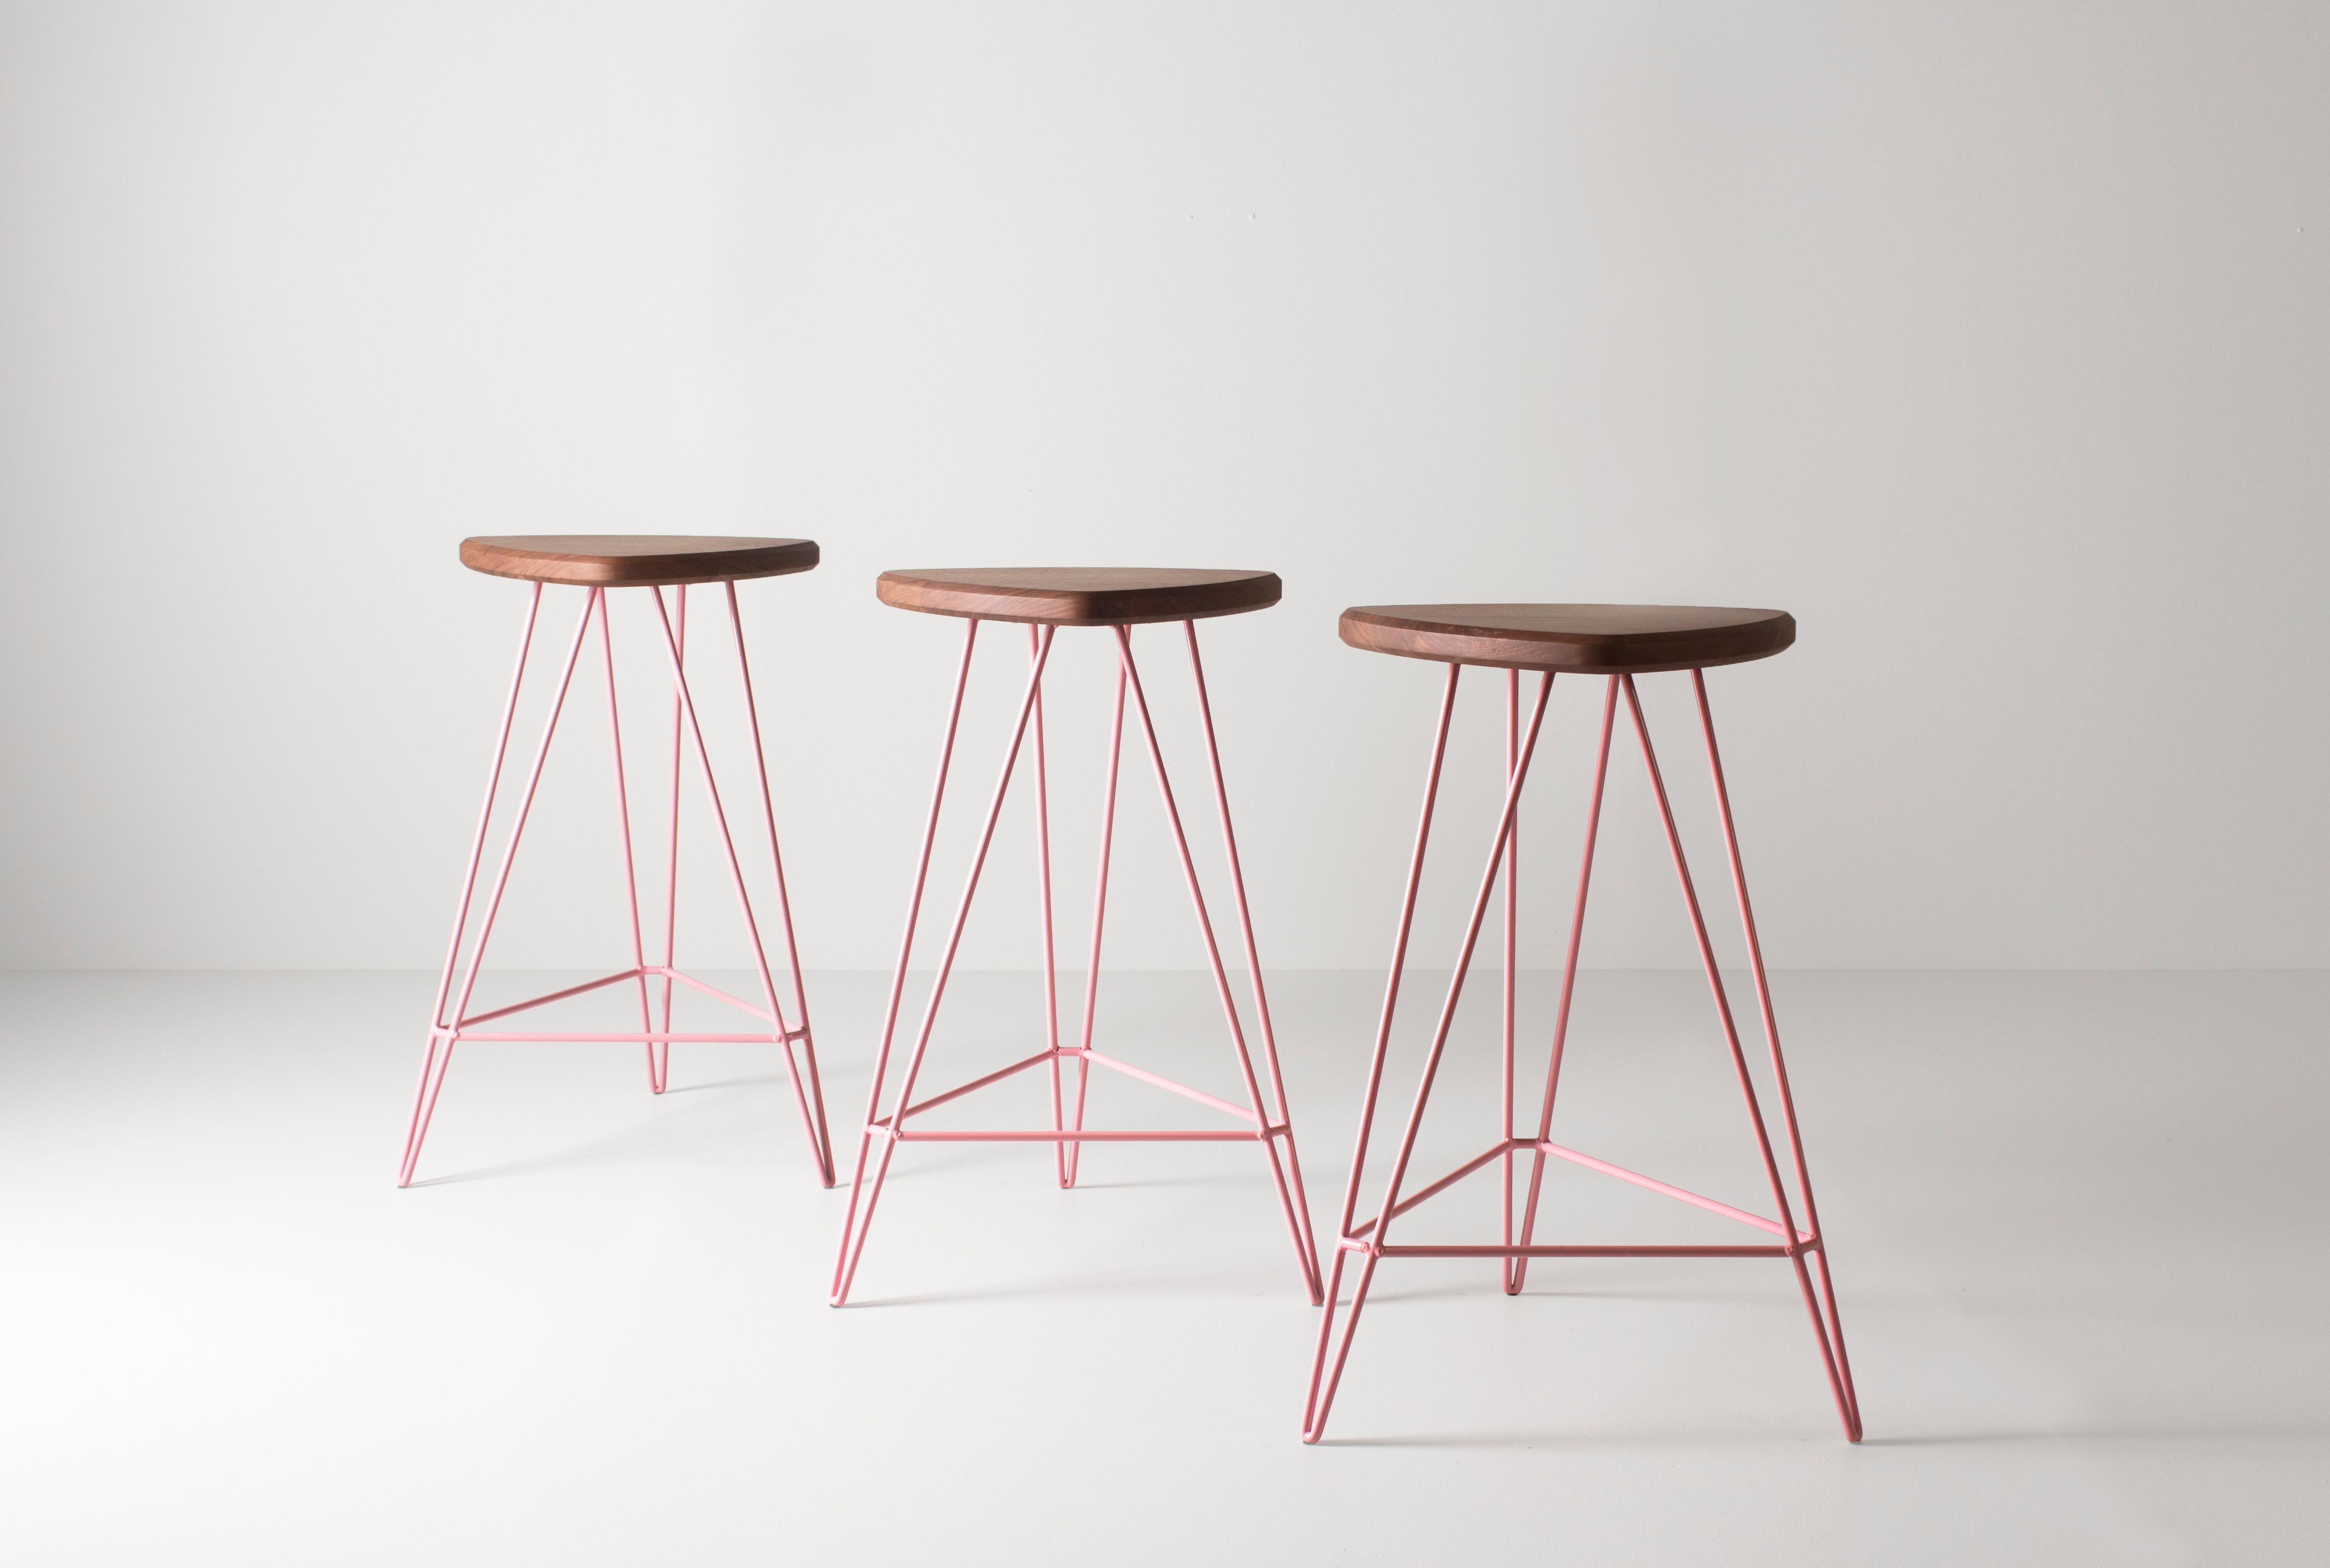 A well-designed piece of furniture blurs the line between functionality and art. The Madison stool is a geometrical masterpiece testing the boundary of what we think is possible with wire, balanced by the warmth and beauty of a natural wood seat. No